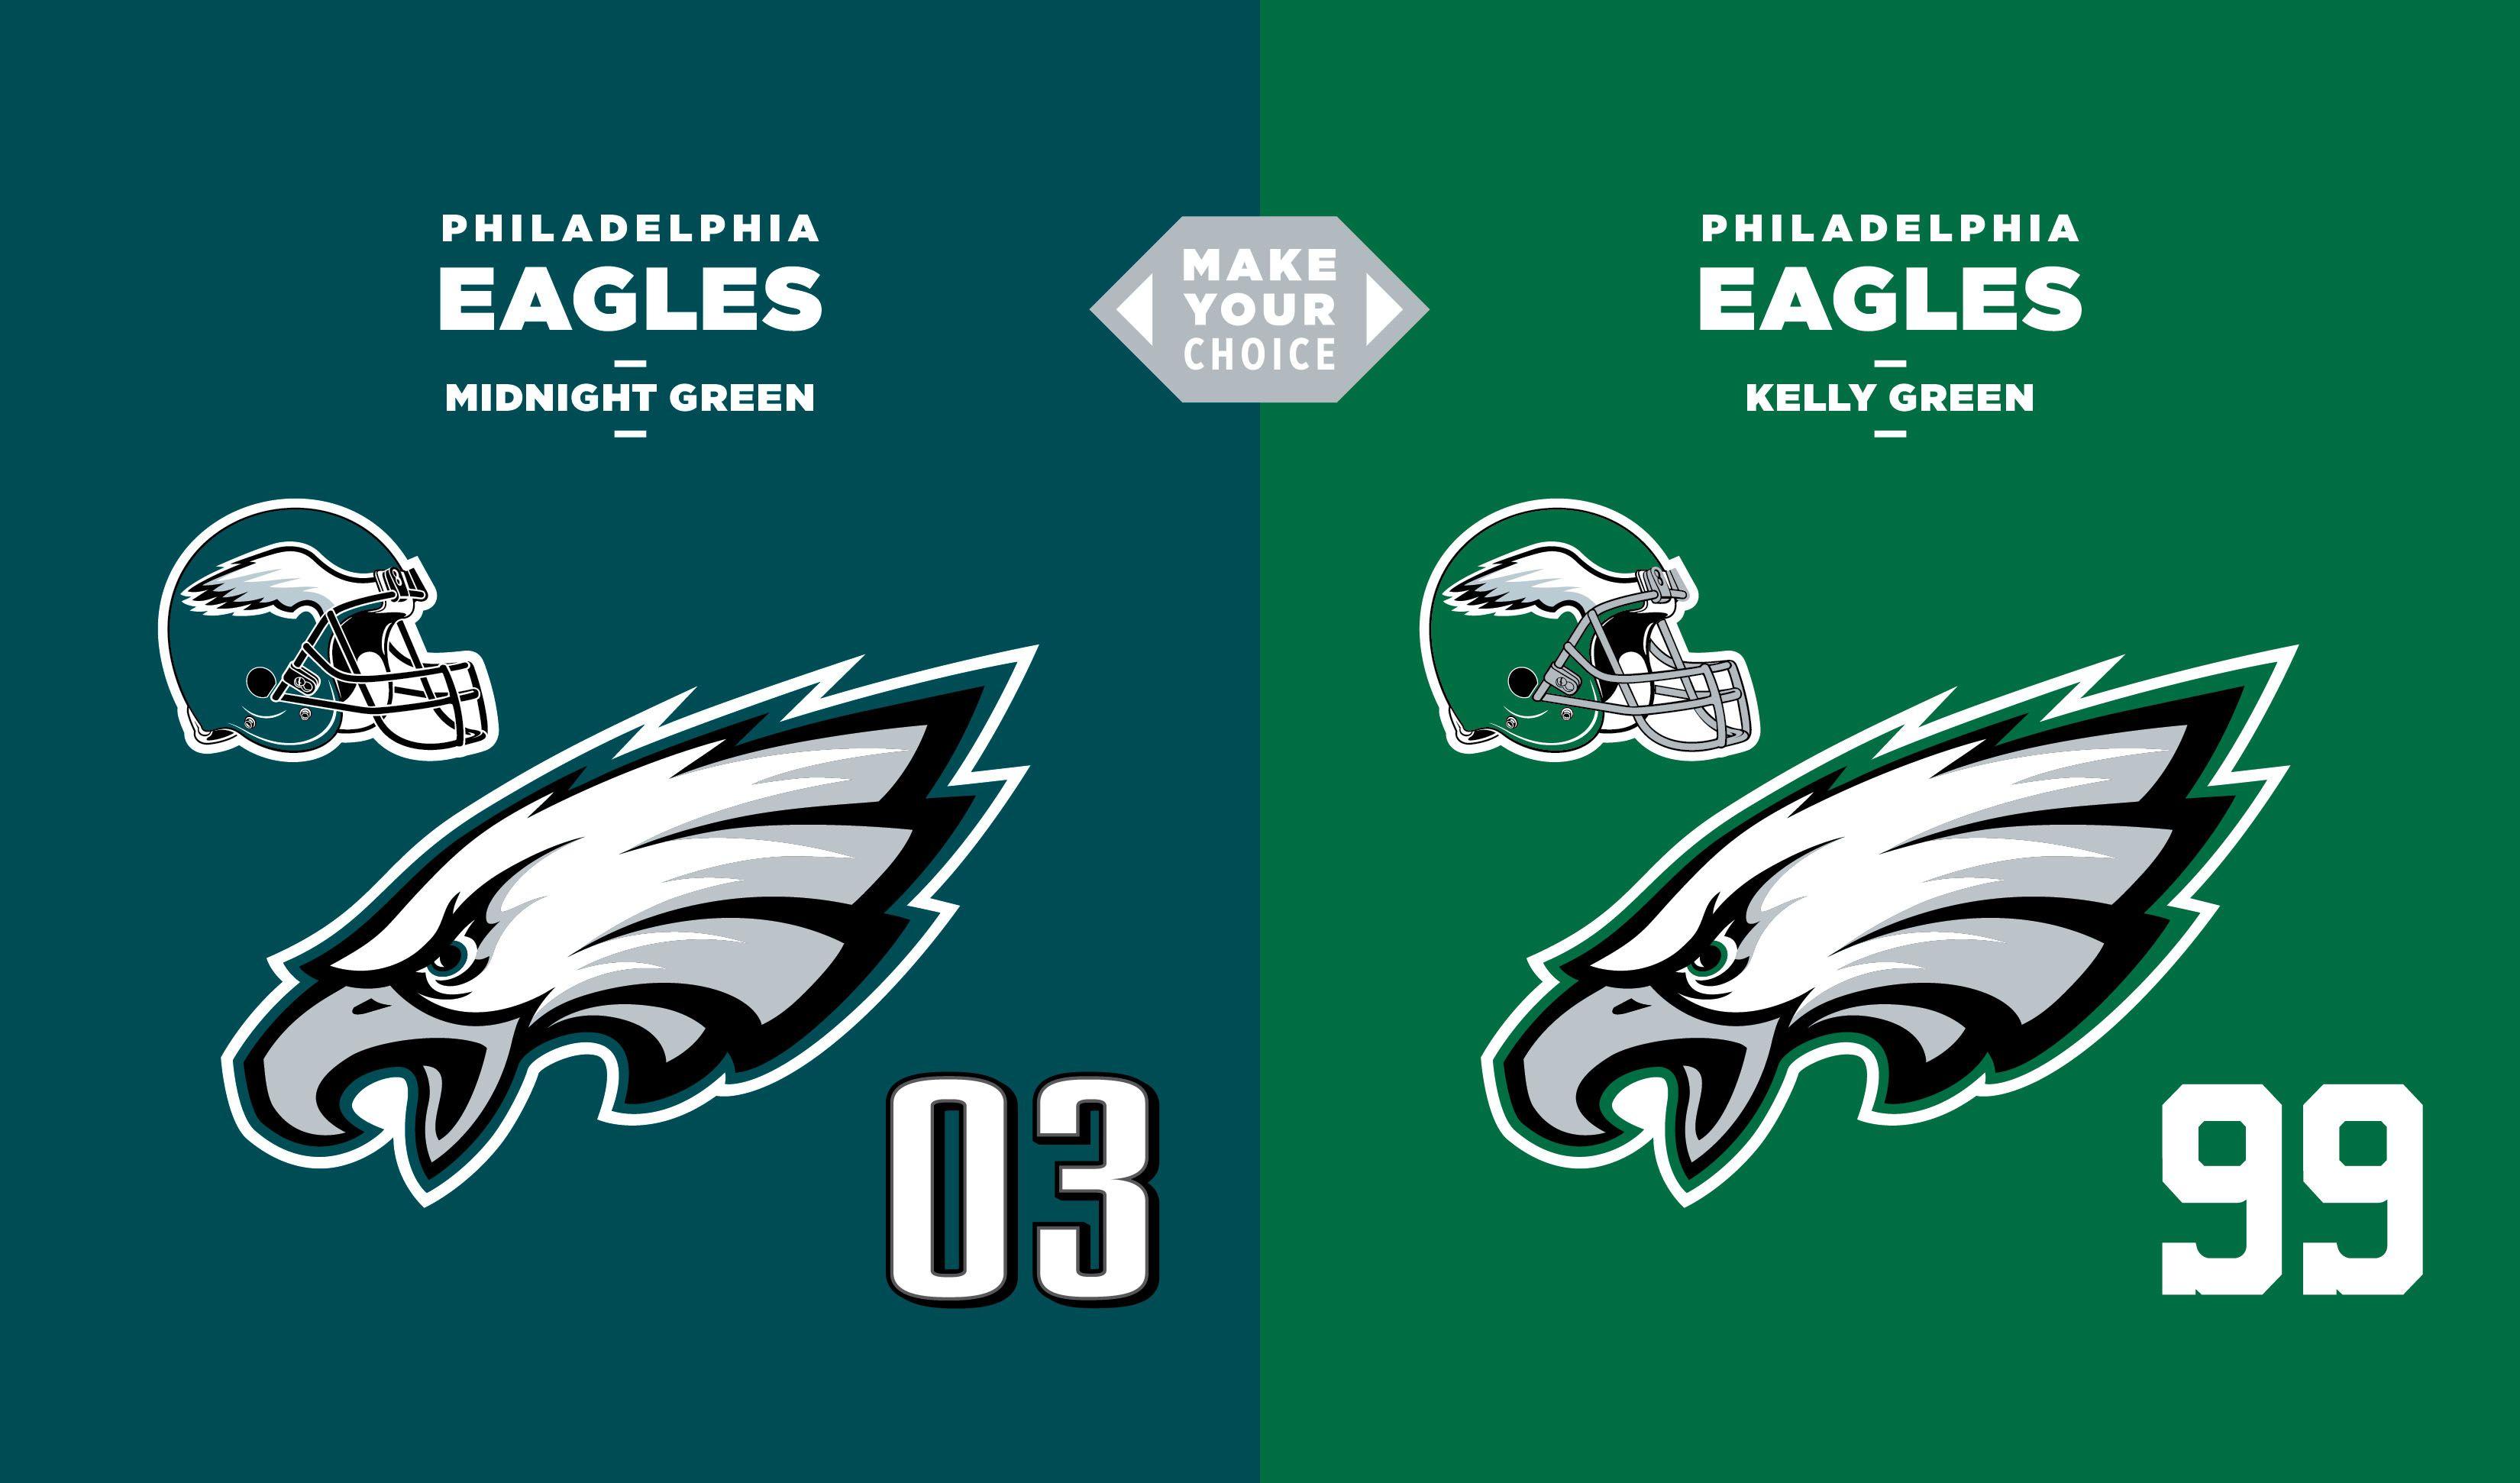 Kelly Green Eagles Logo - The Eagles might go back to Kelly Green. Sports Graphics. Sports